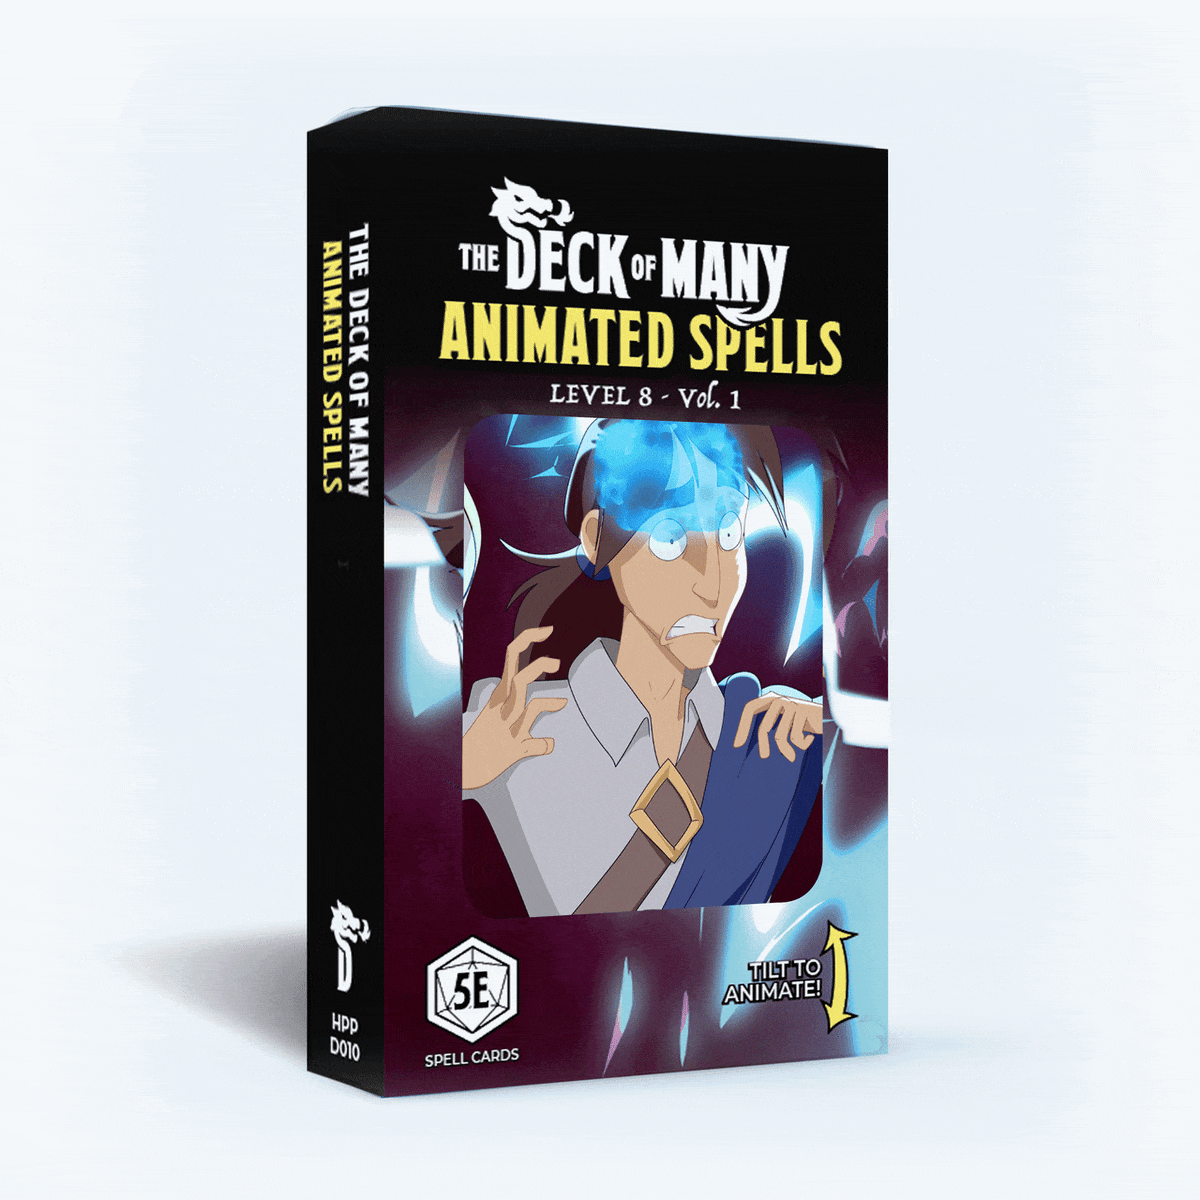 D&D 5E Compatible: Deck of Many - Animated Spells: Level 8 Volume 1